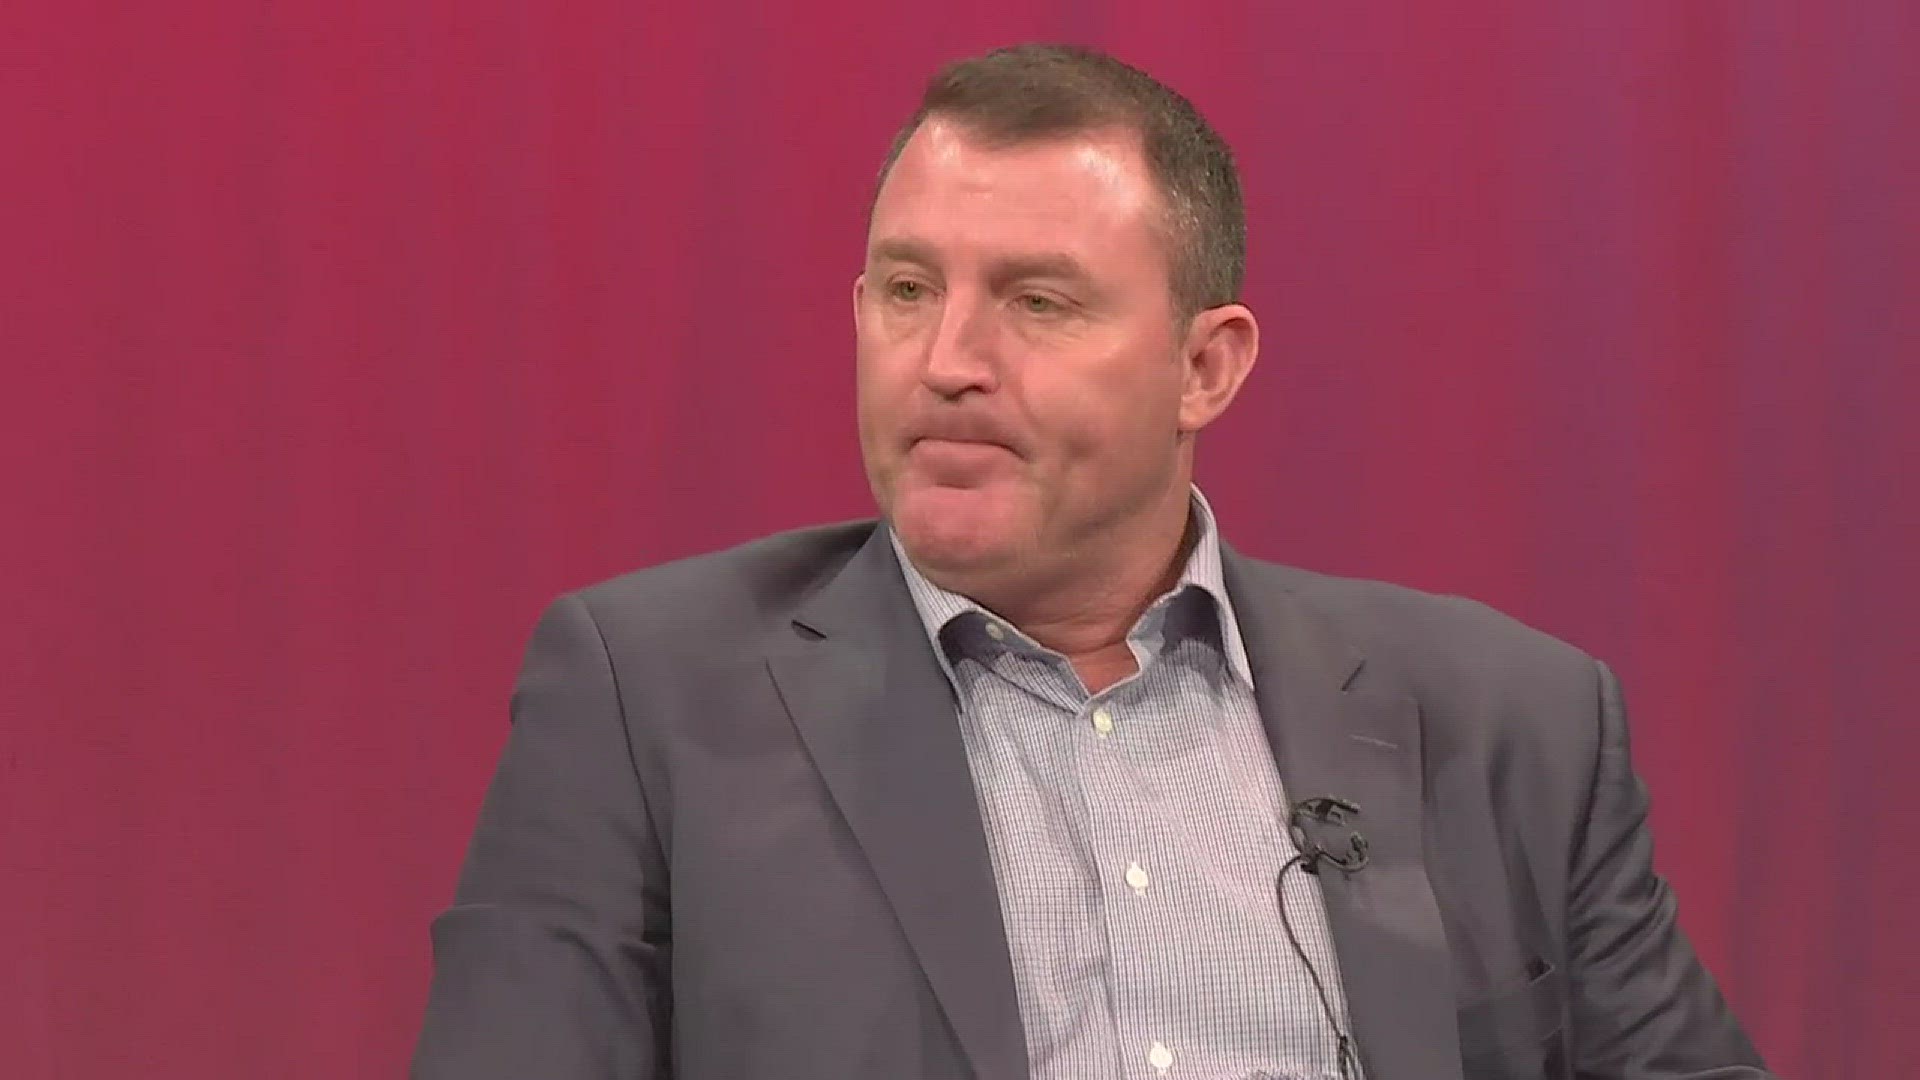 Jim Thome on why he never took PEDs